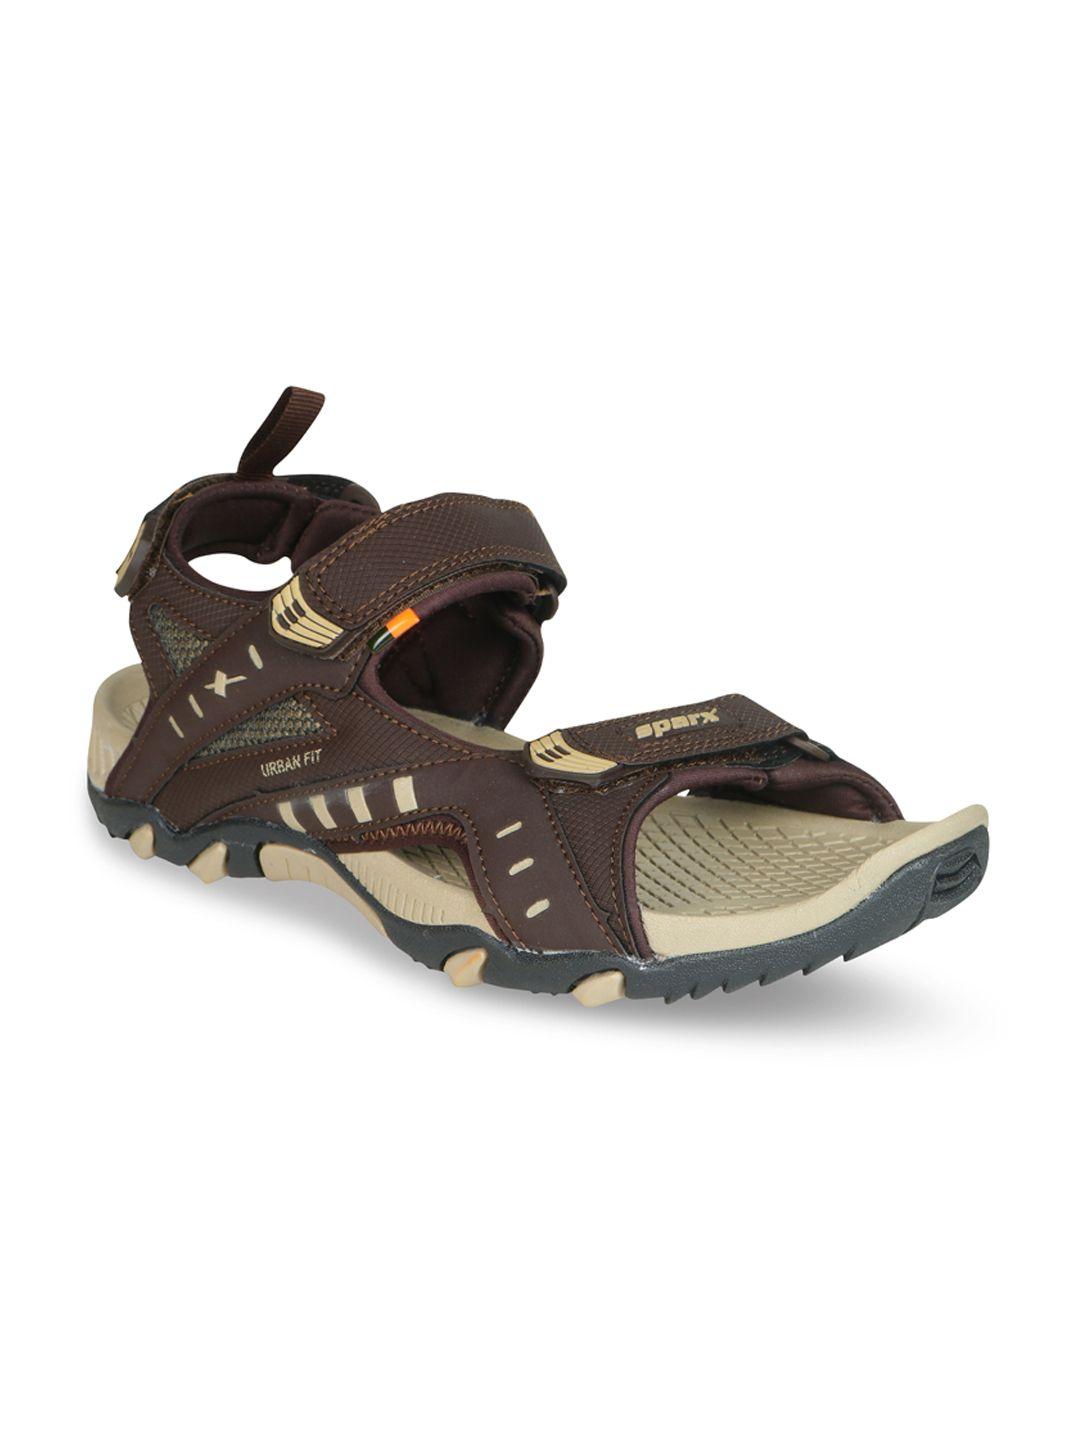 sparx-men-patterned-floater--sports-sandals--with-velcro-closure